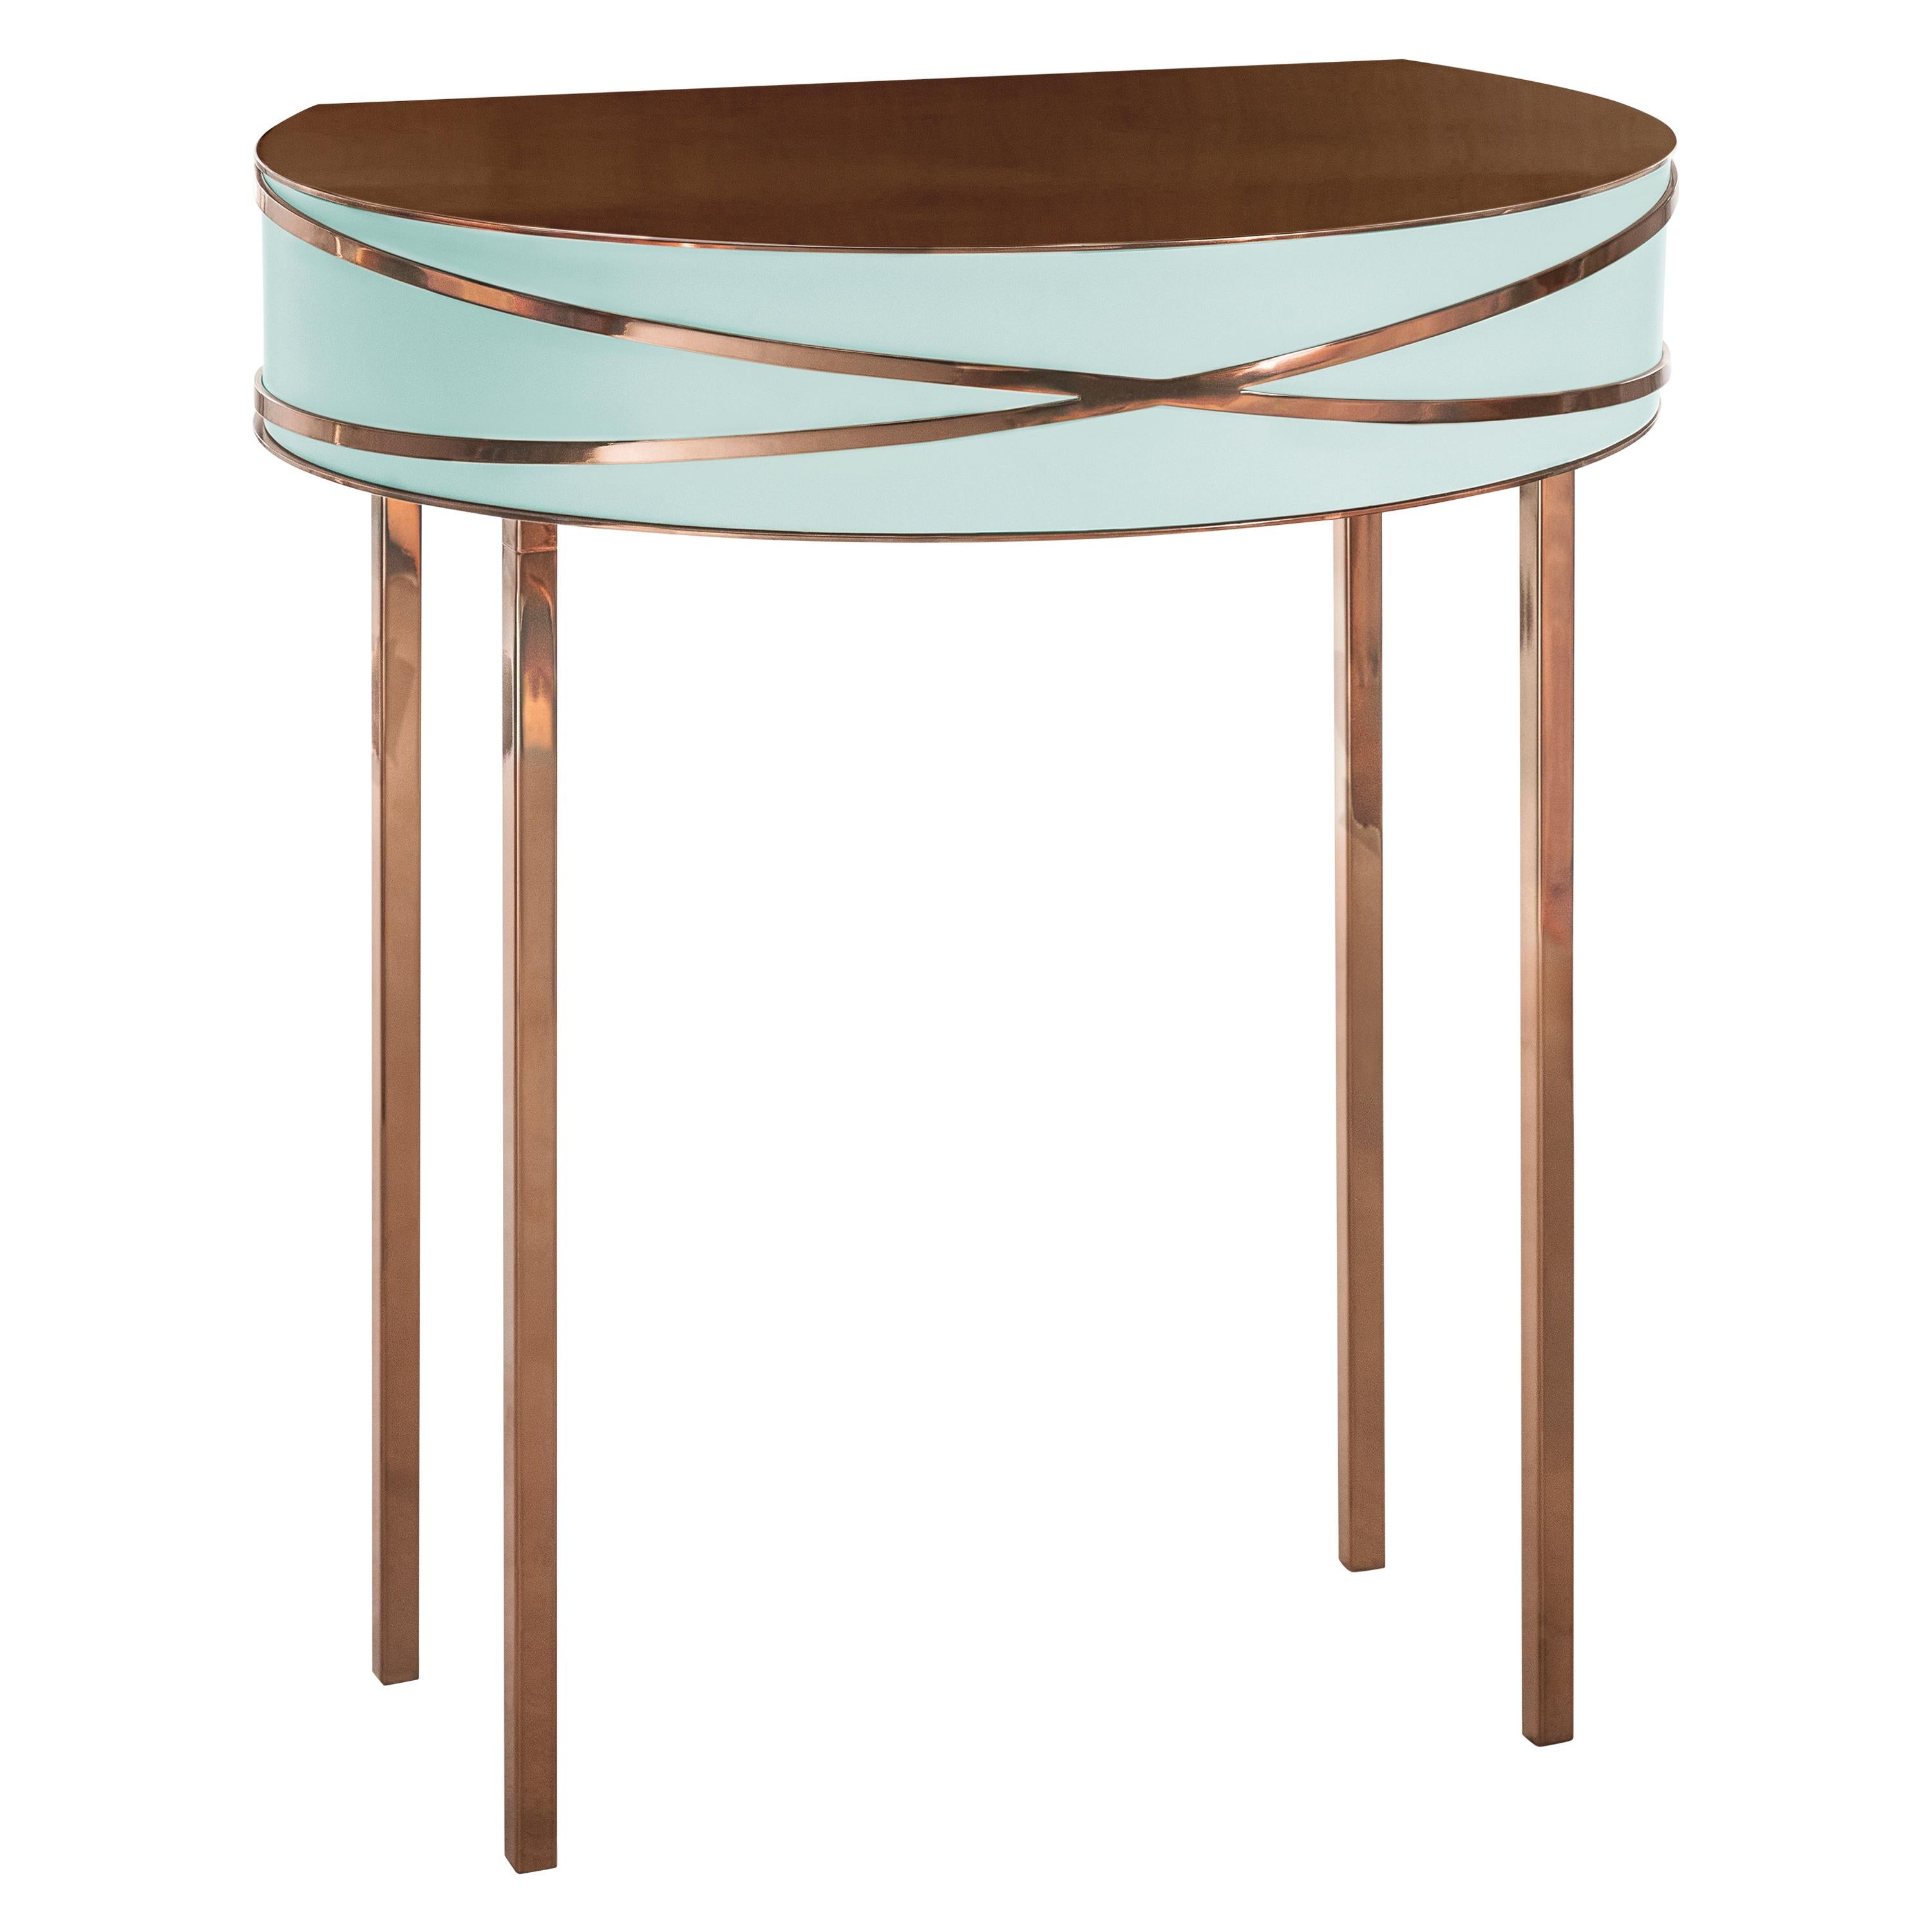 Stella Mint Green Console or Bedside Table with Rose Gold Trims by Nika Zupanc